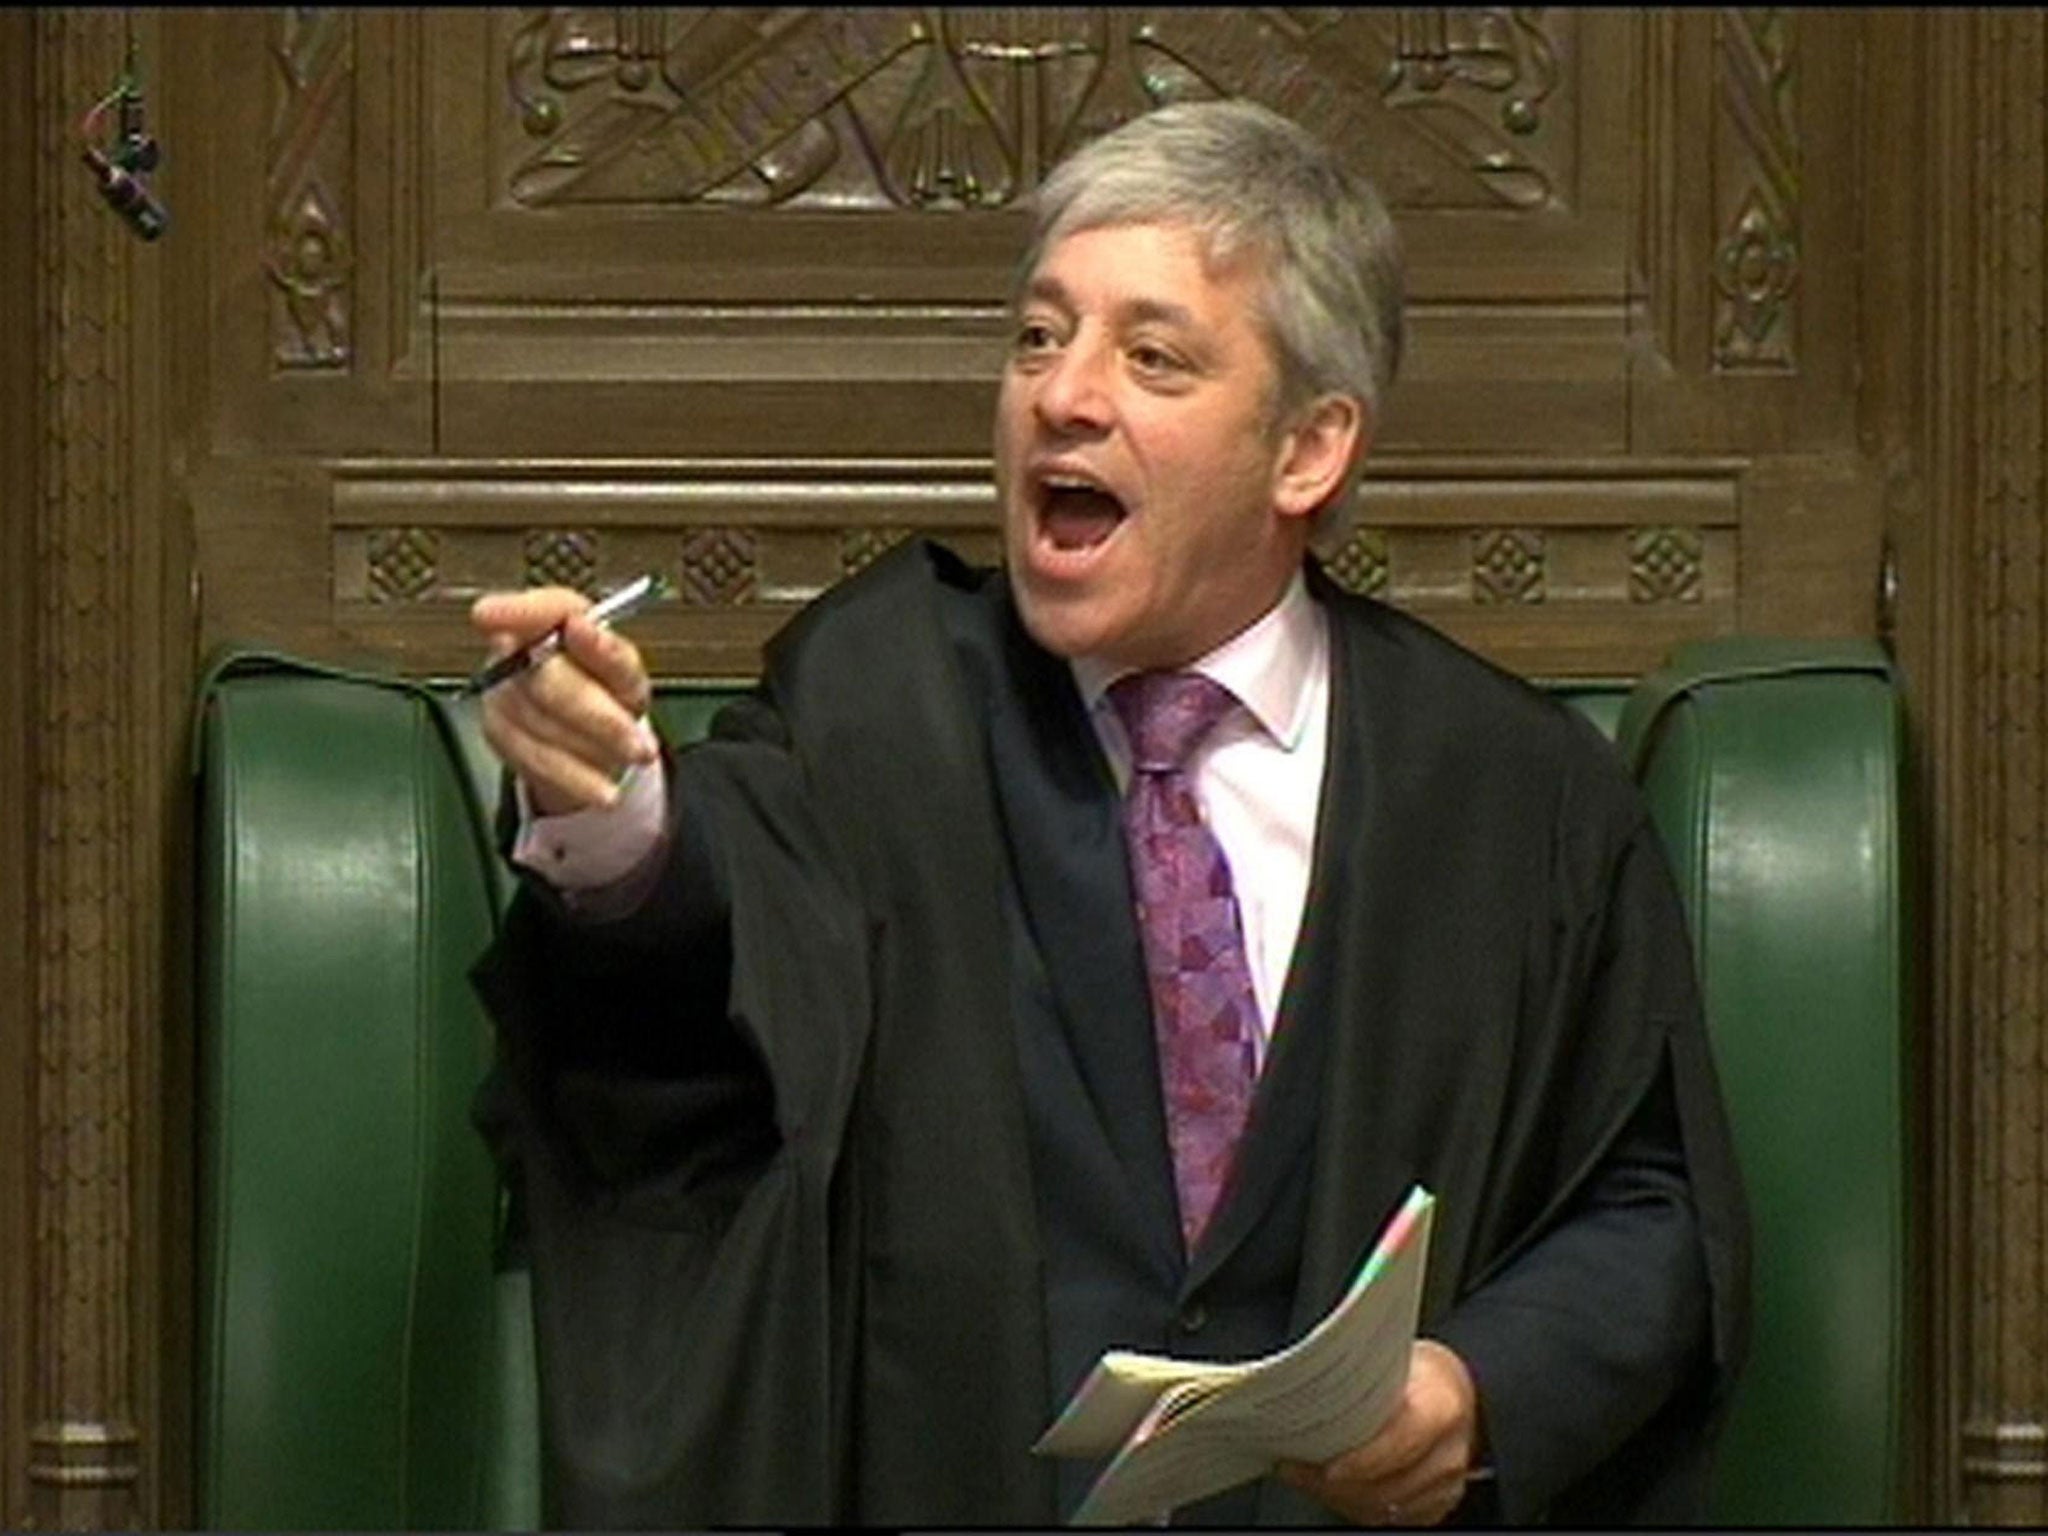 House of Commons Speaker John Bercow has been accused of being a 'little weasel' over a row regarding an alleged 'car-bump'